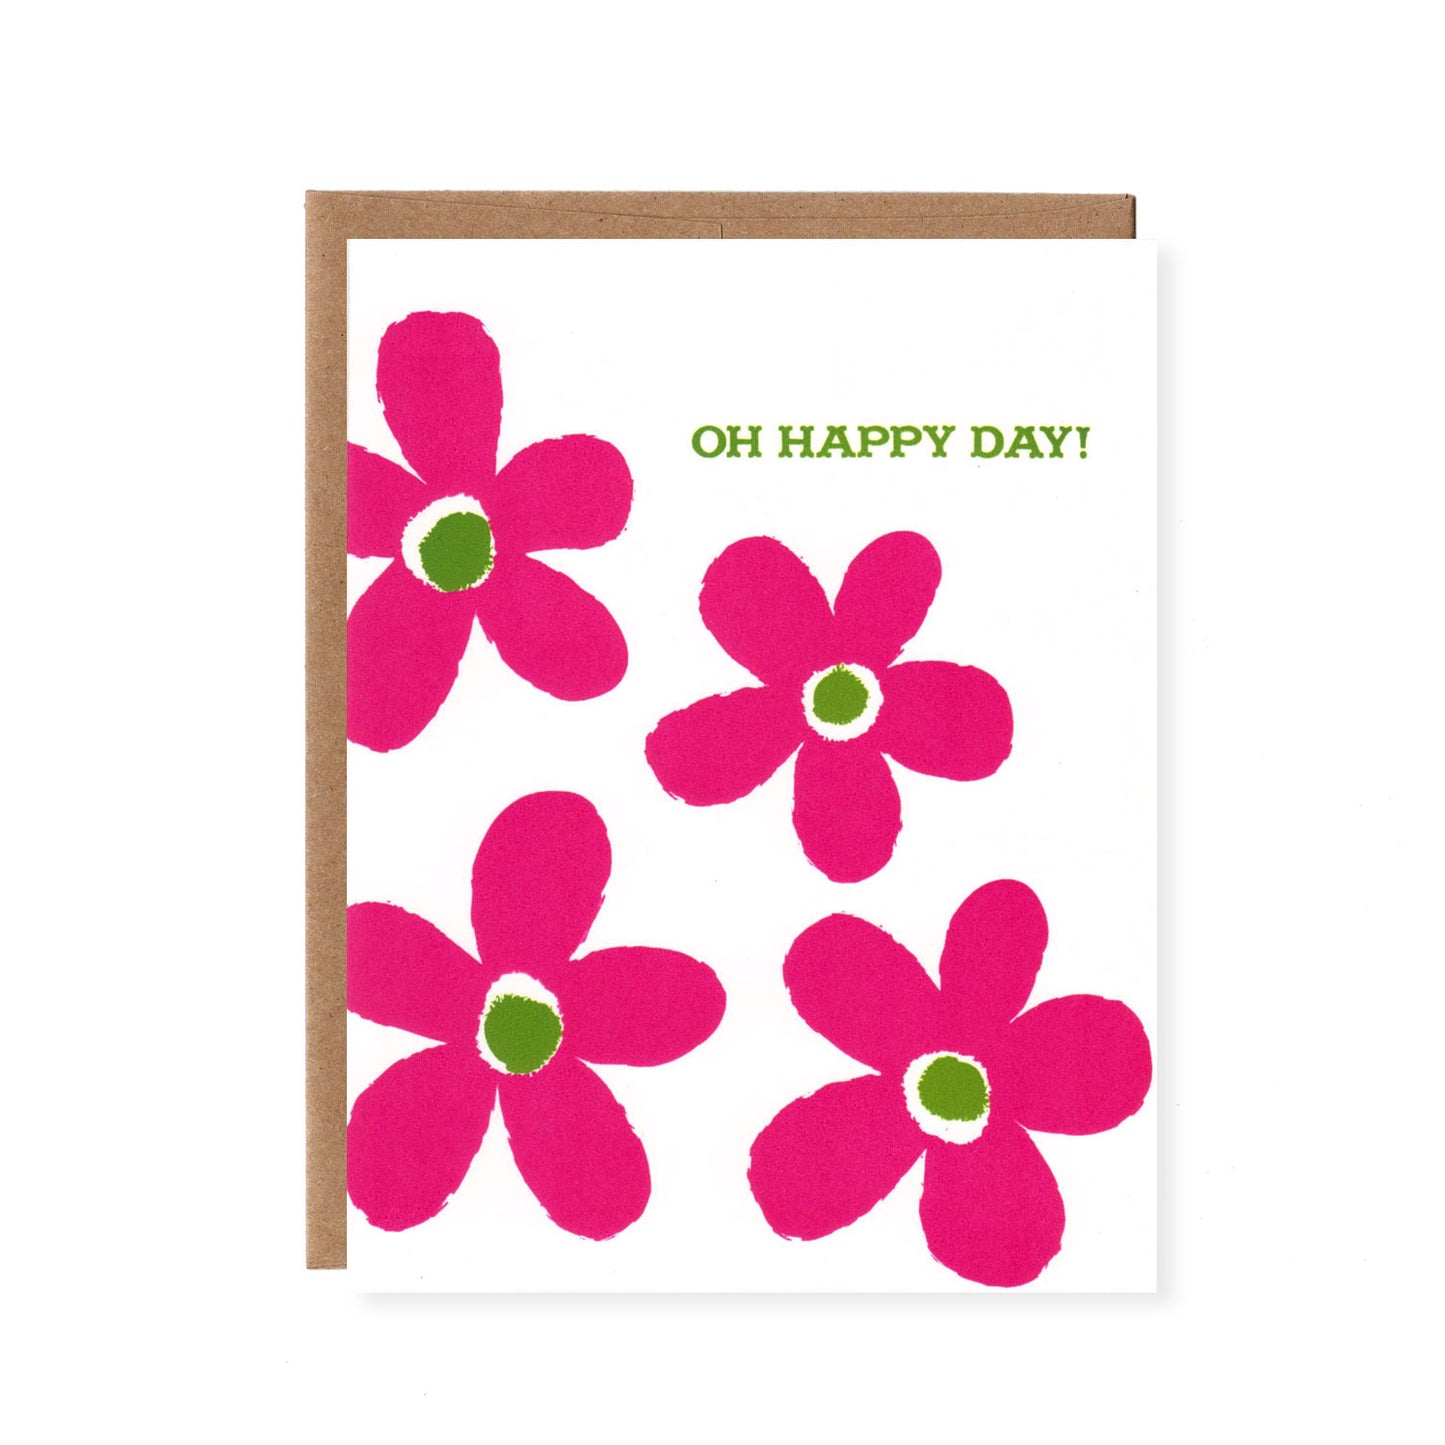 Product image for Oh Happy Day! -- Floral Screenprinted Greeting Card for Birthdays, Mother's Day, Baby Showers